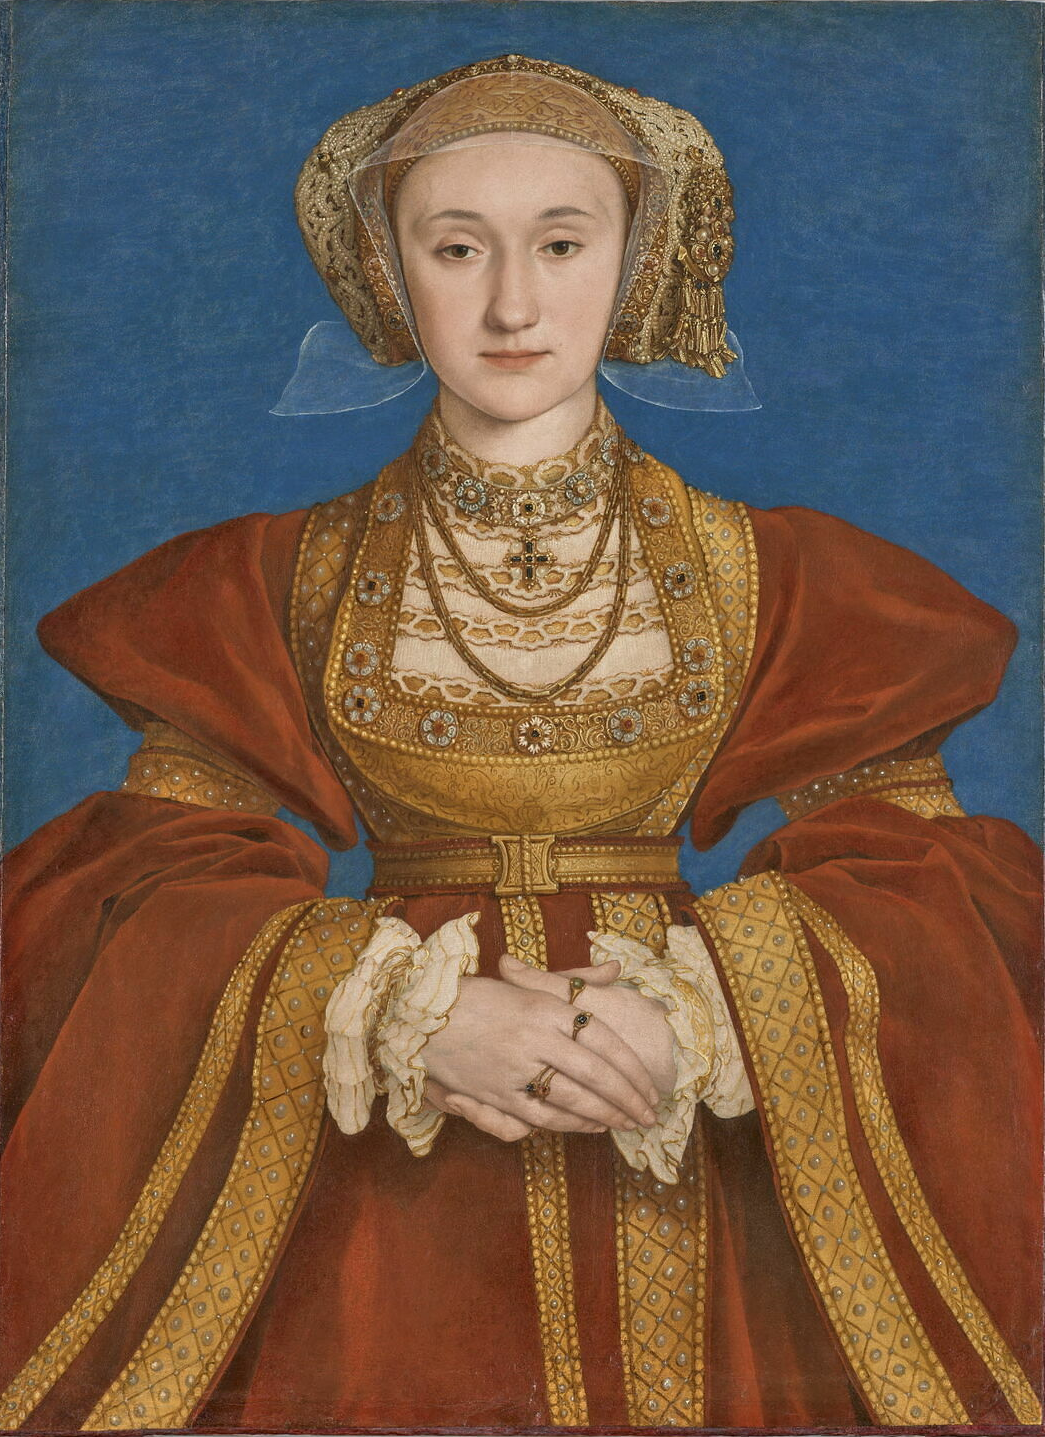 Anna Klevská by Hans Holbein the Younger - cca 1539 - 65 x 48 cm 